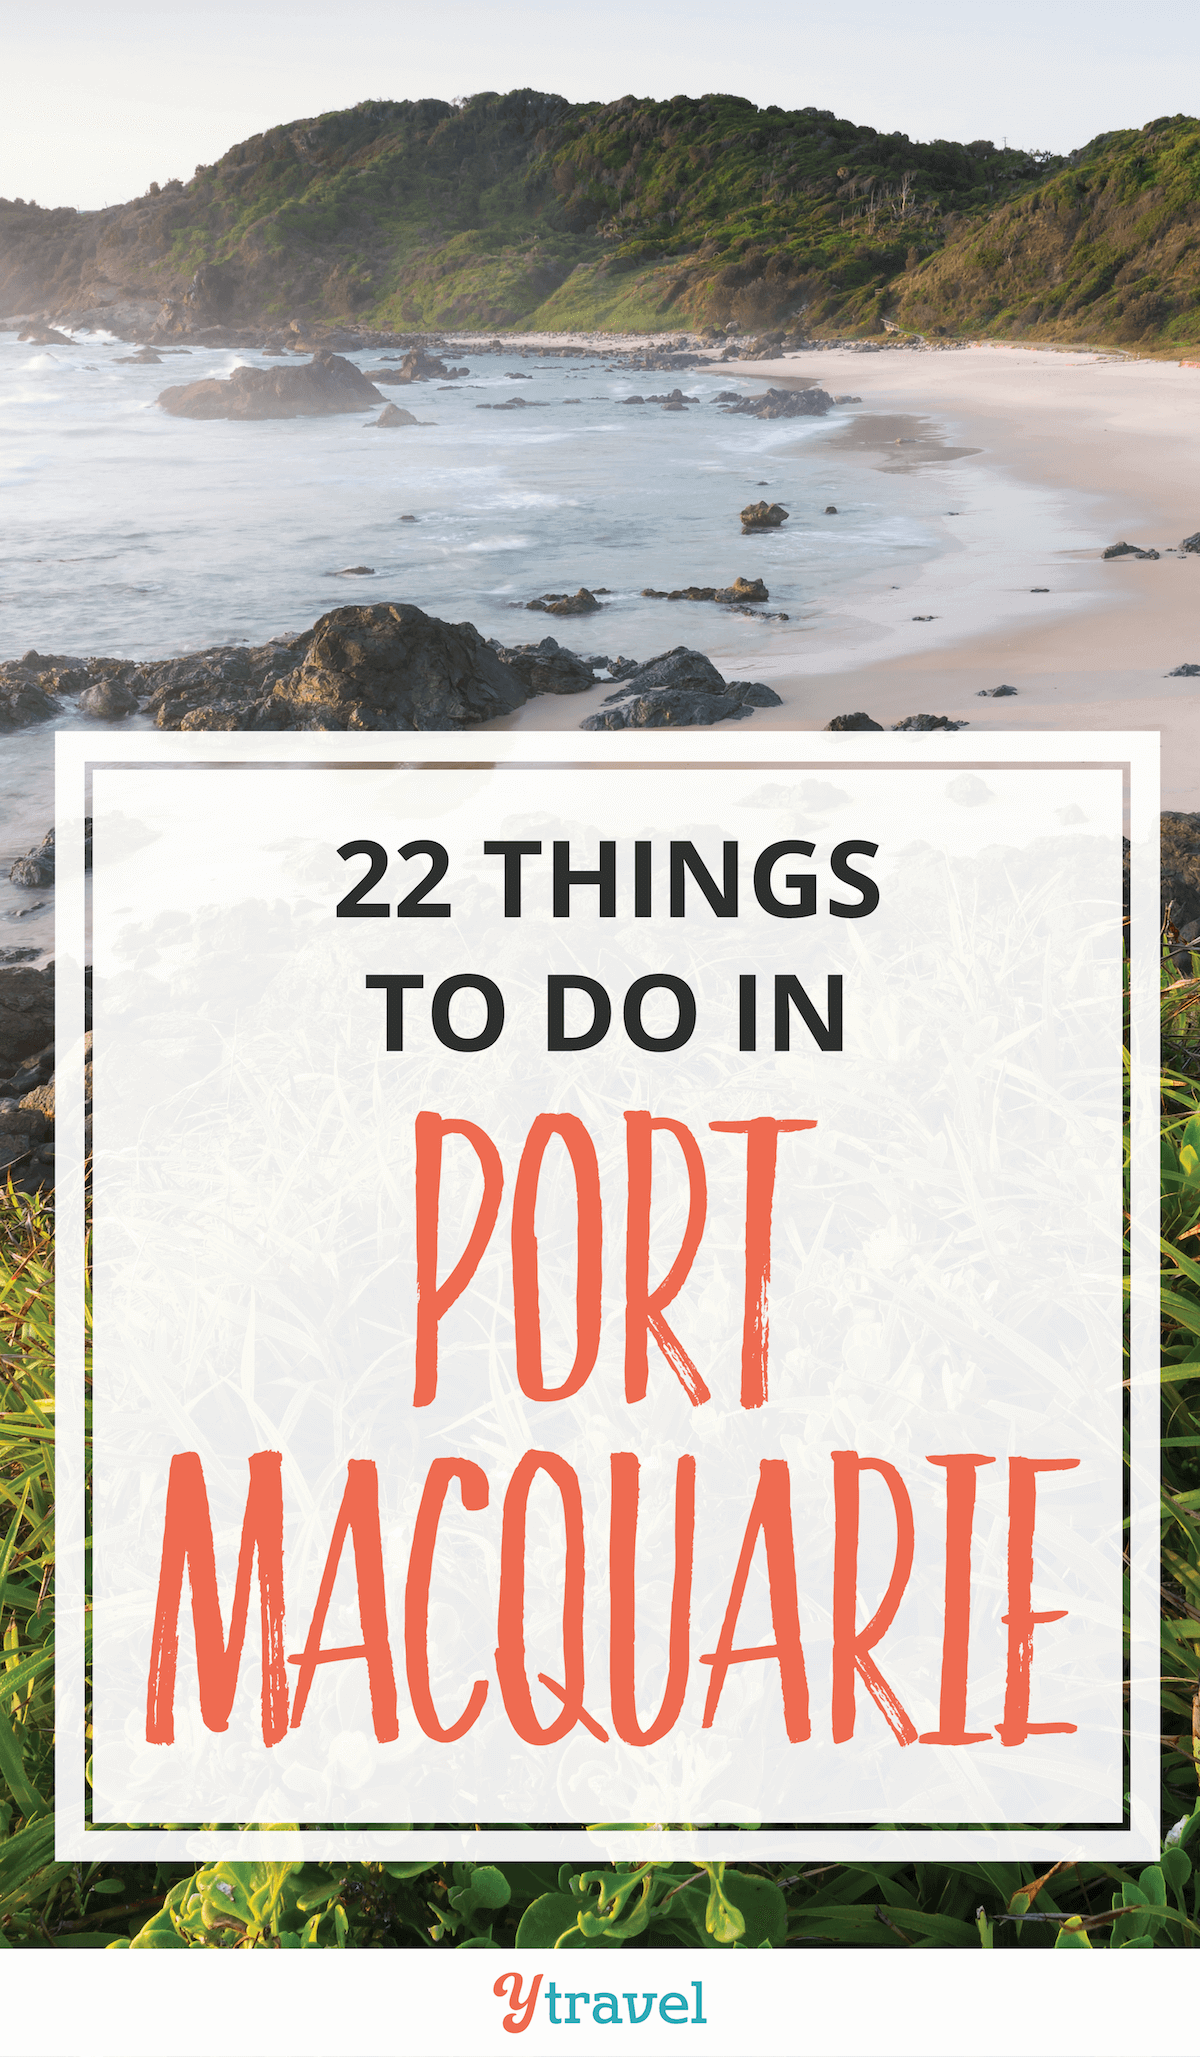 Check out these 22 Things to Do in Port Macquarie.